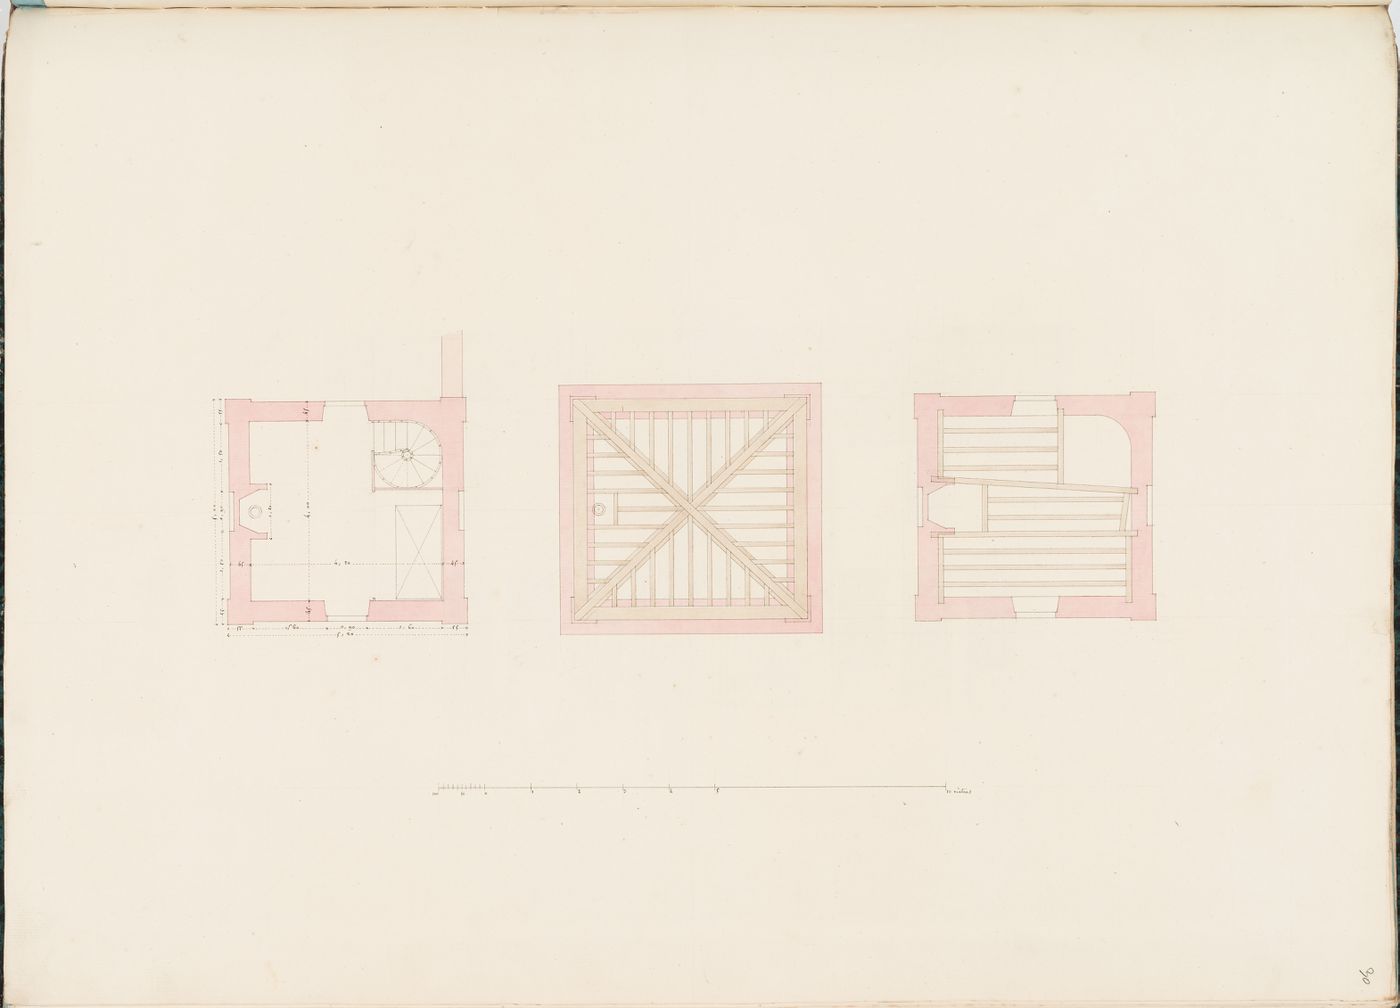 Partial floor plan and framing plans, probably for a reservoir, Parc de Clichy